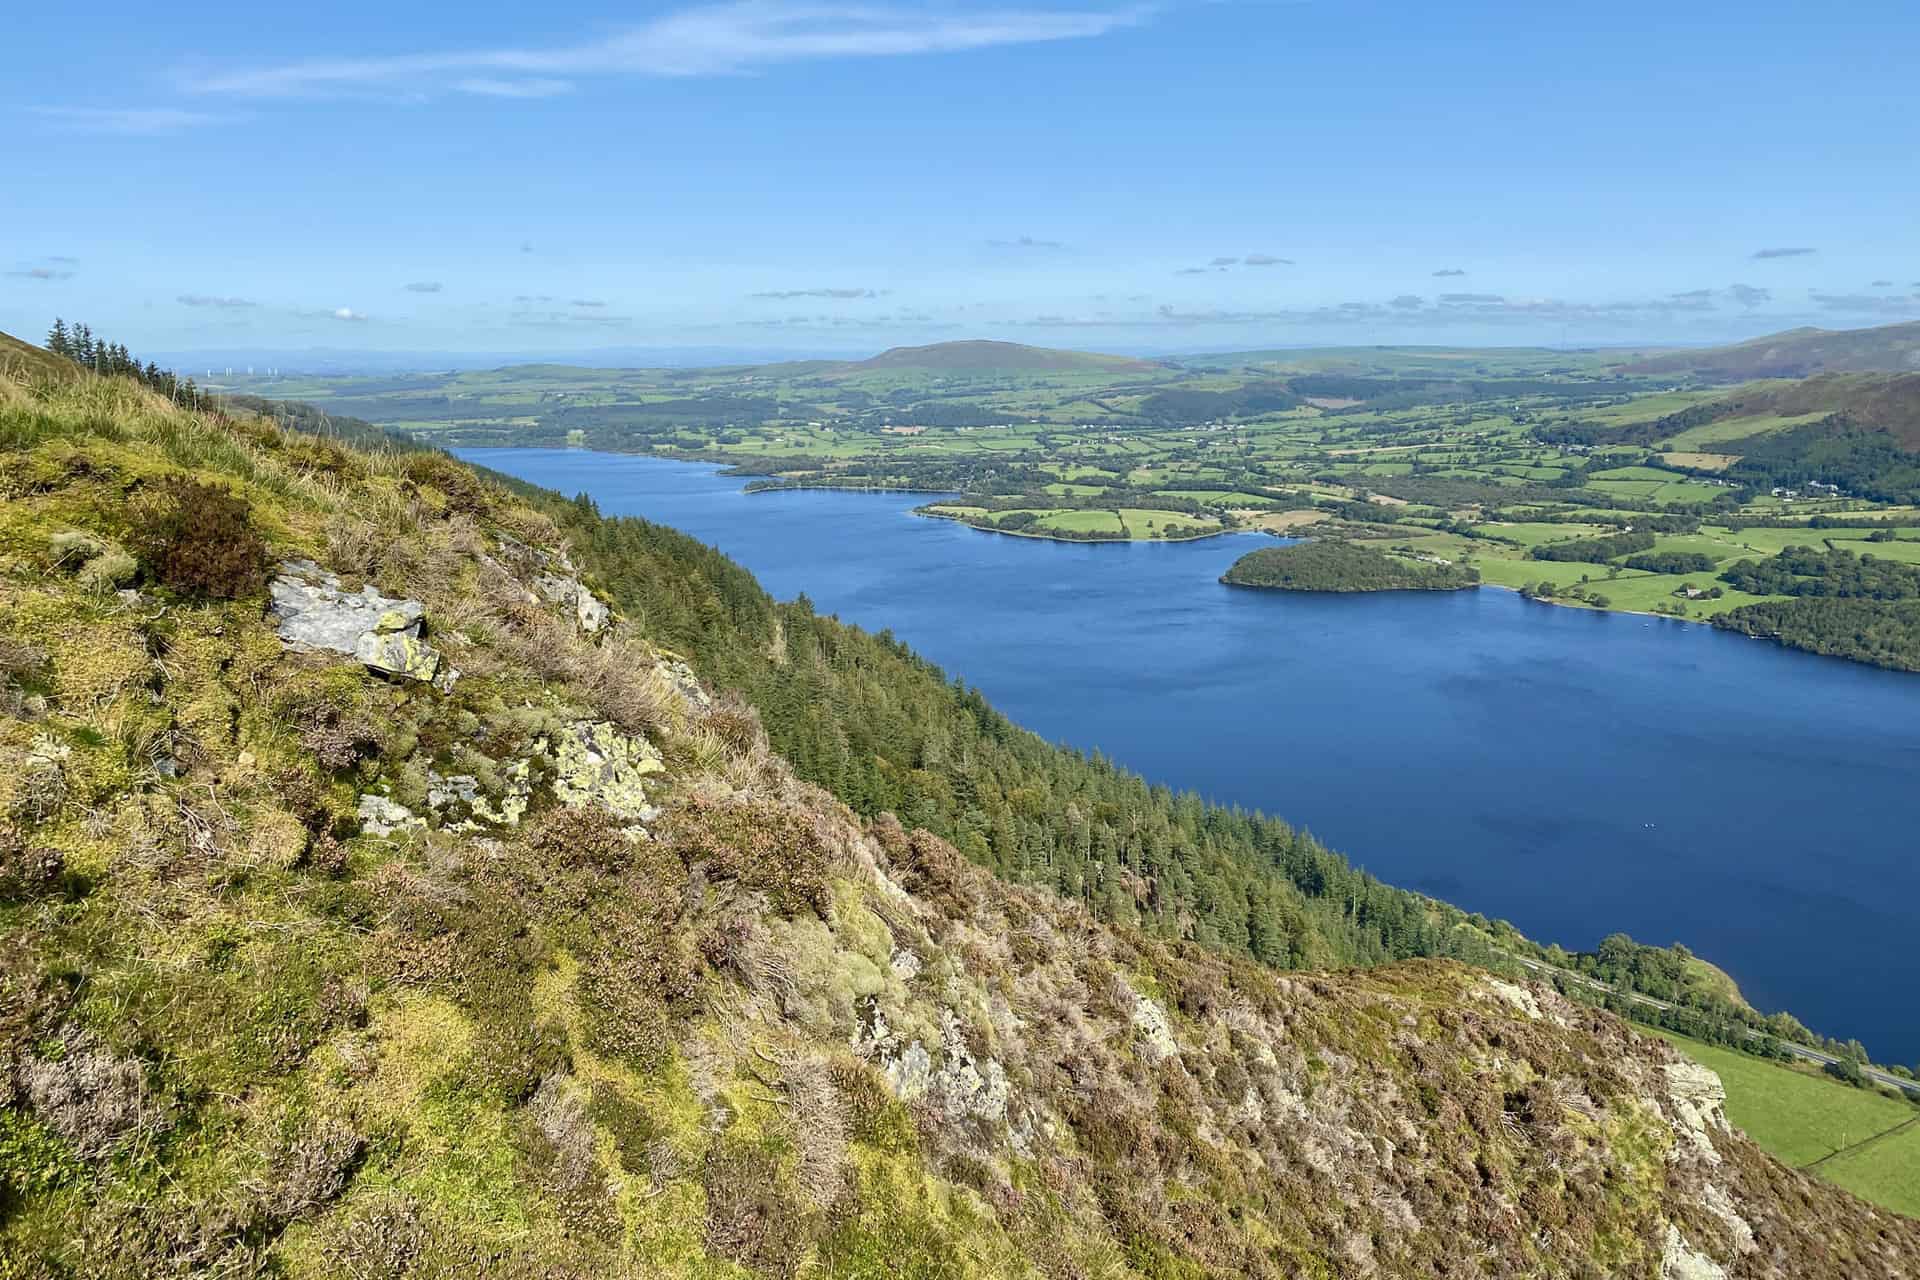 Looking down upon Bassenthwaite Lake from the northern slopes of Barf. An absolute highlight of this Barf walk.